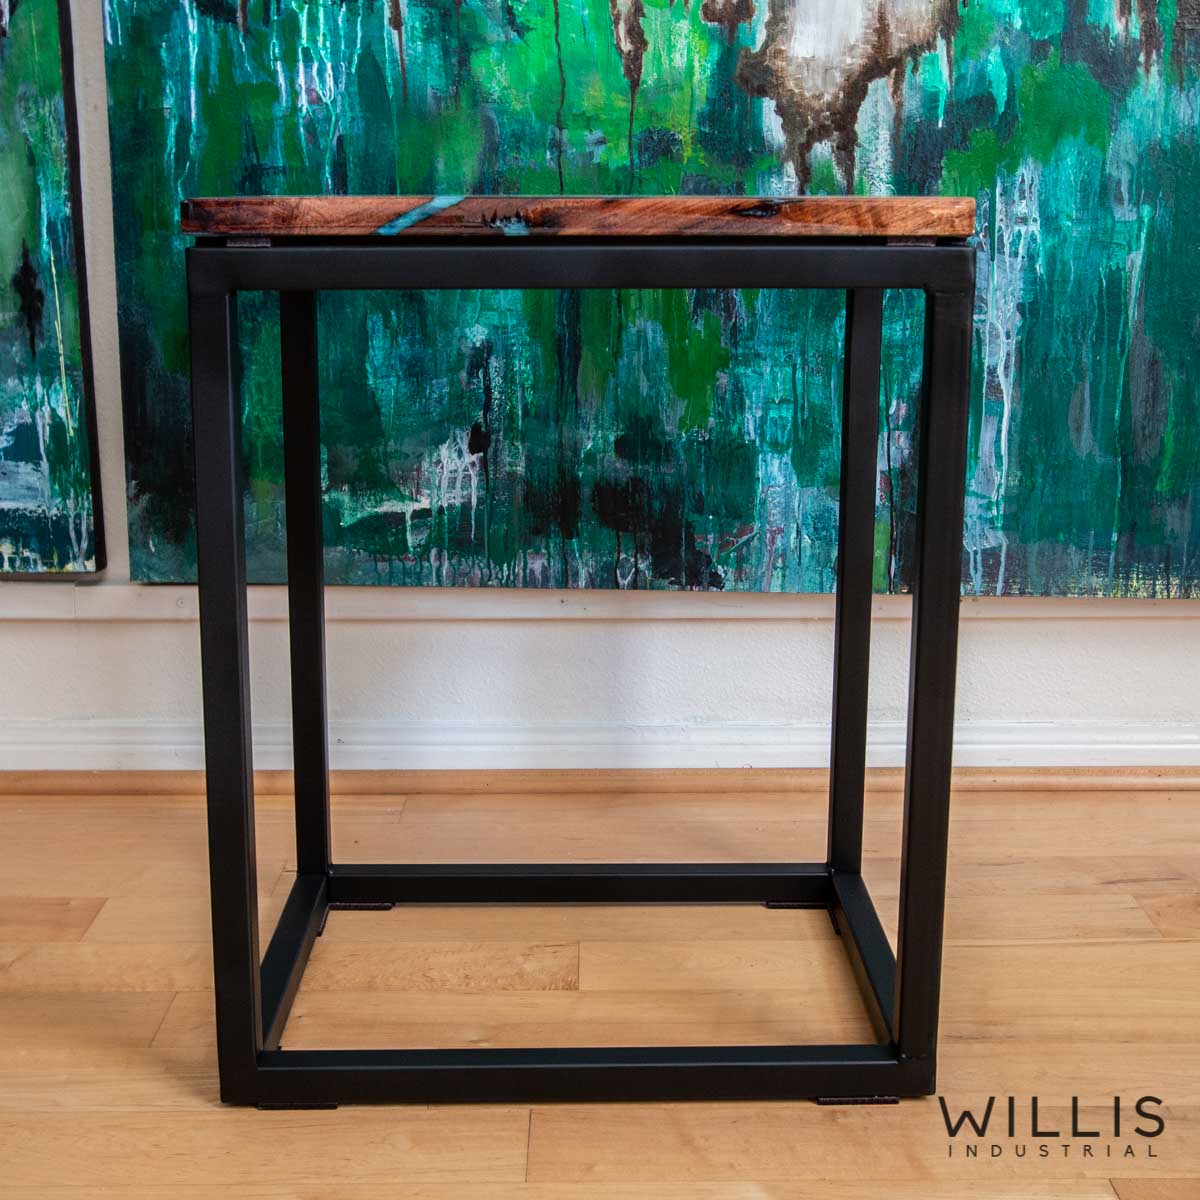 Willis Industrial Furniture | Rustic, Modern Furniture | Mesquite Boards with Turquoise Epoxy & Black Painted Steel Cubed Frame